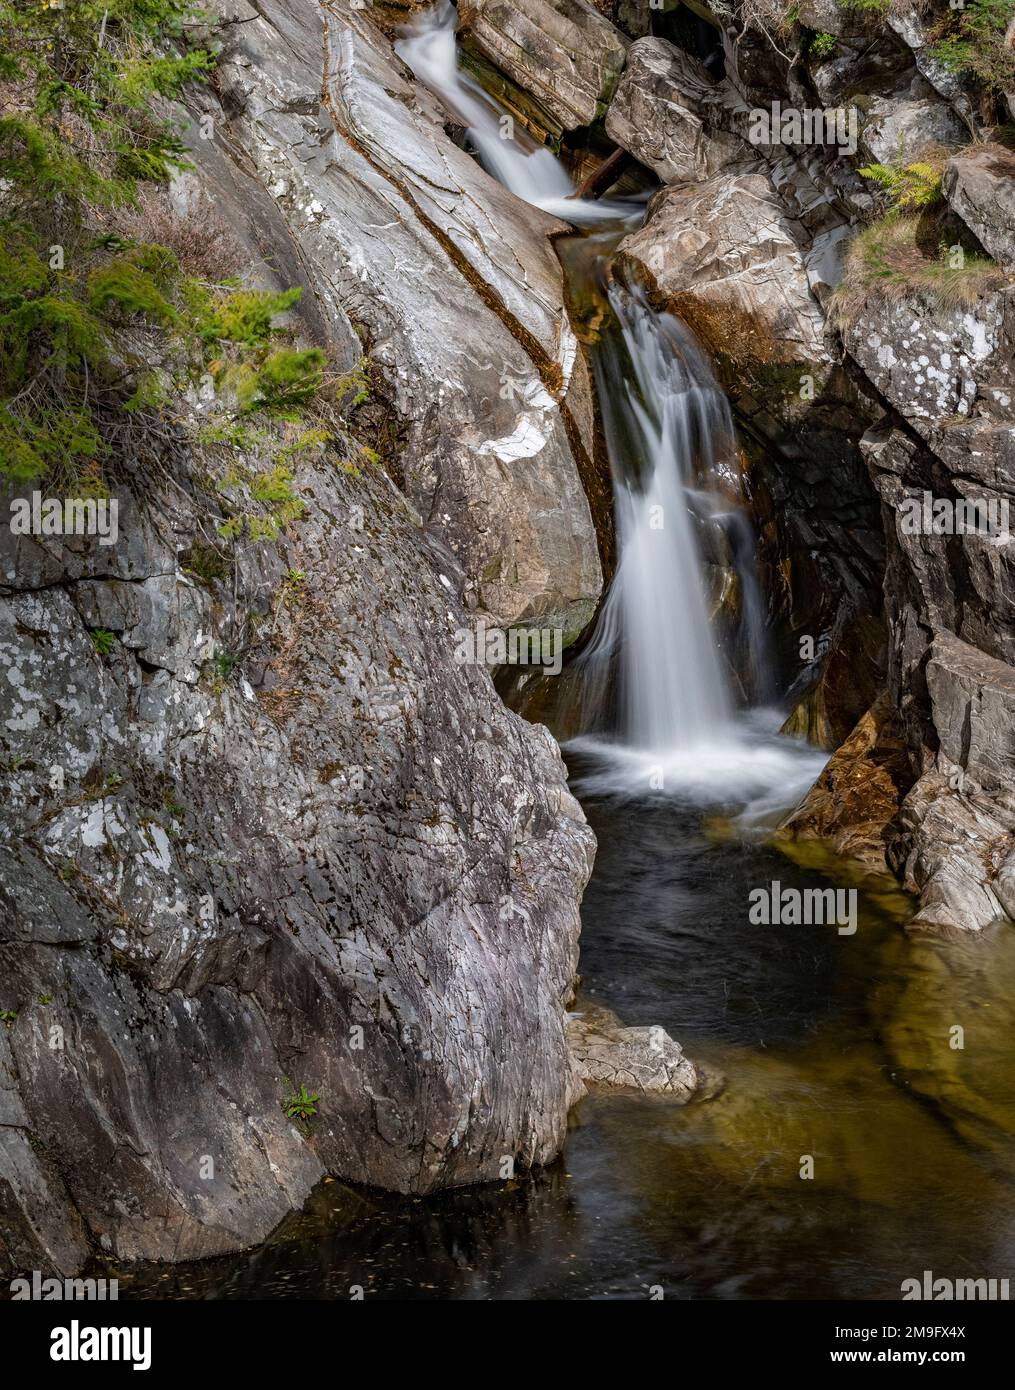 A view of one of the waterfalls at the Falls of Bruar, Perth and Kinross, Scotland Stock Photo